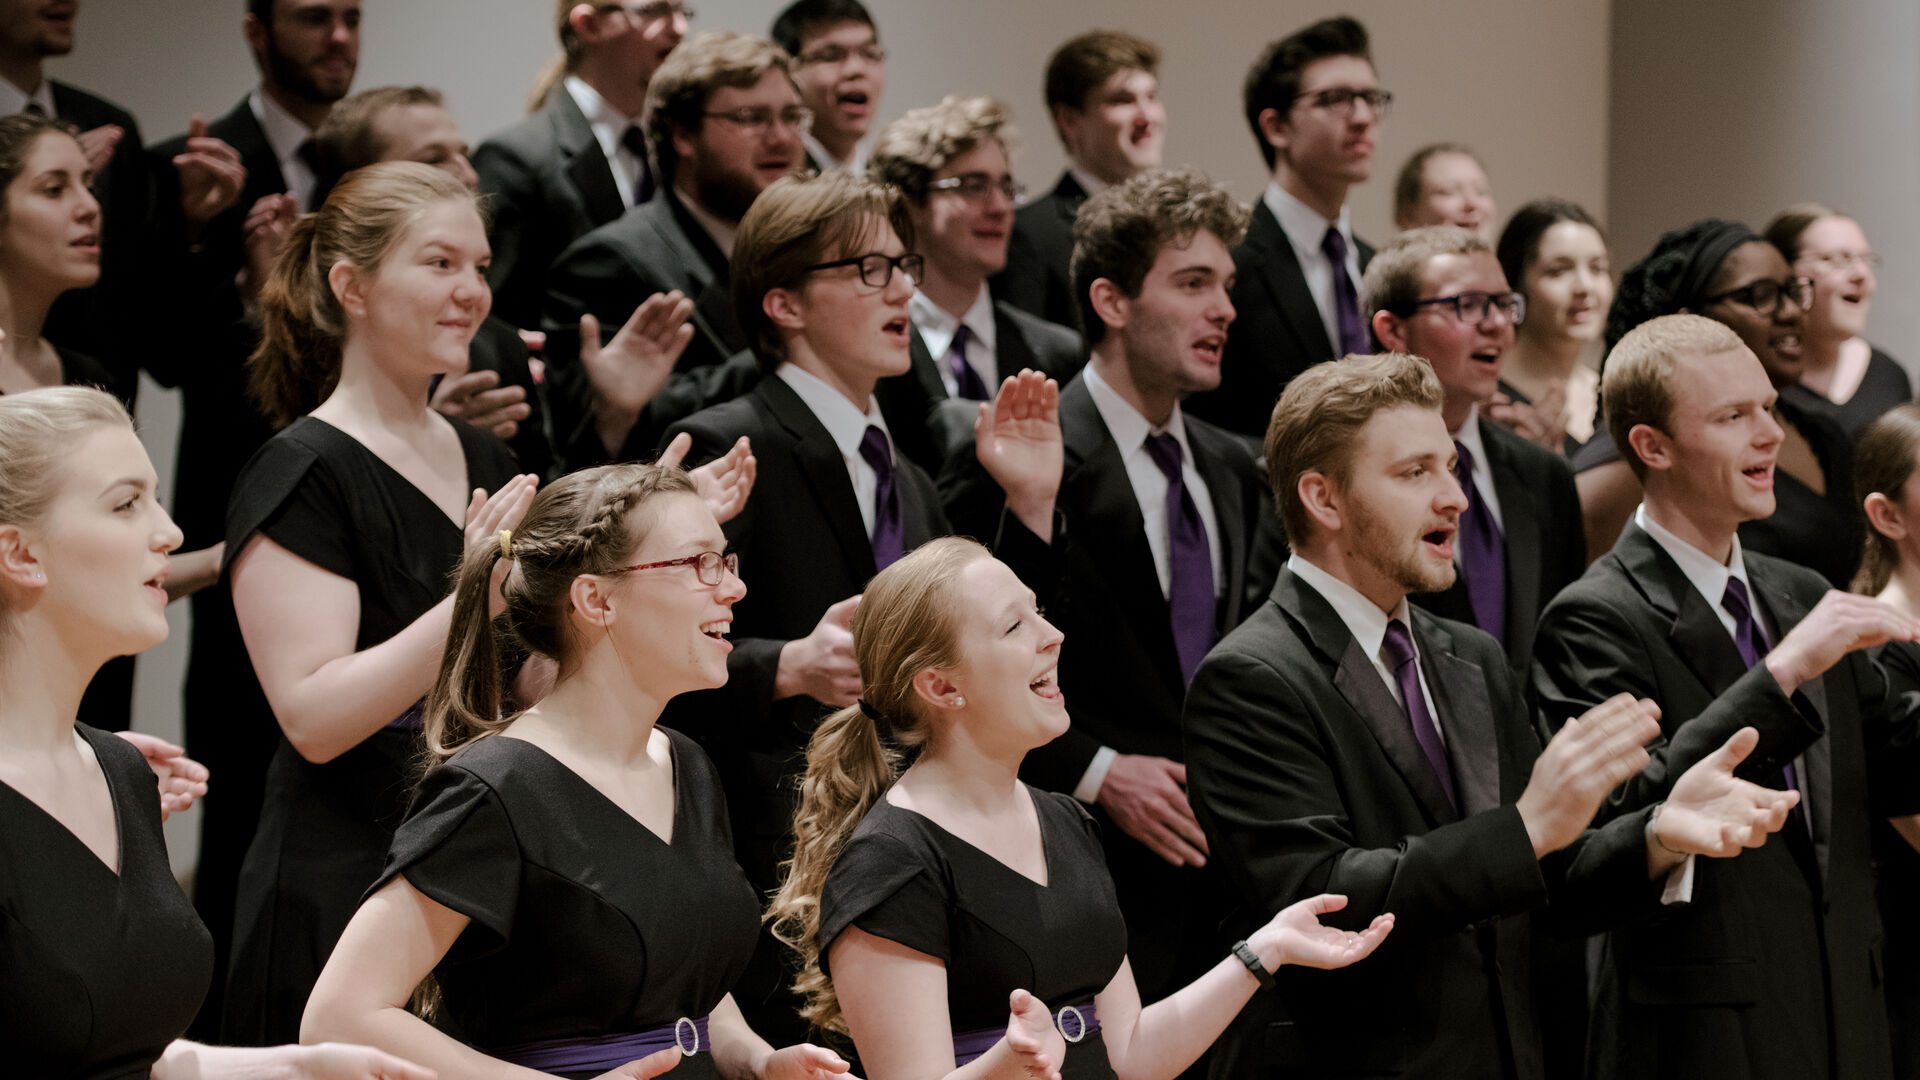 Houghton University's college choir dressed in black singing and clapping.